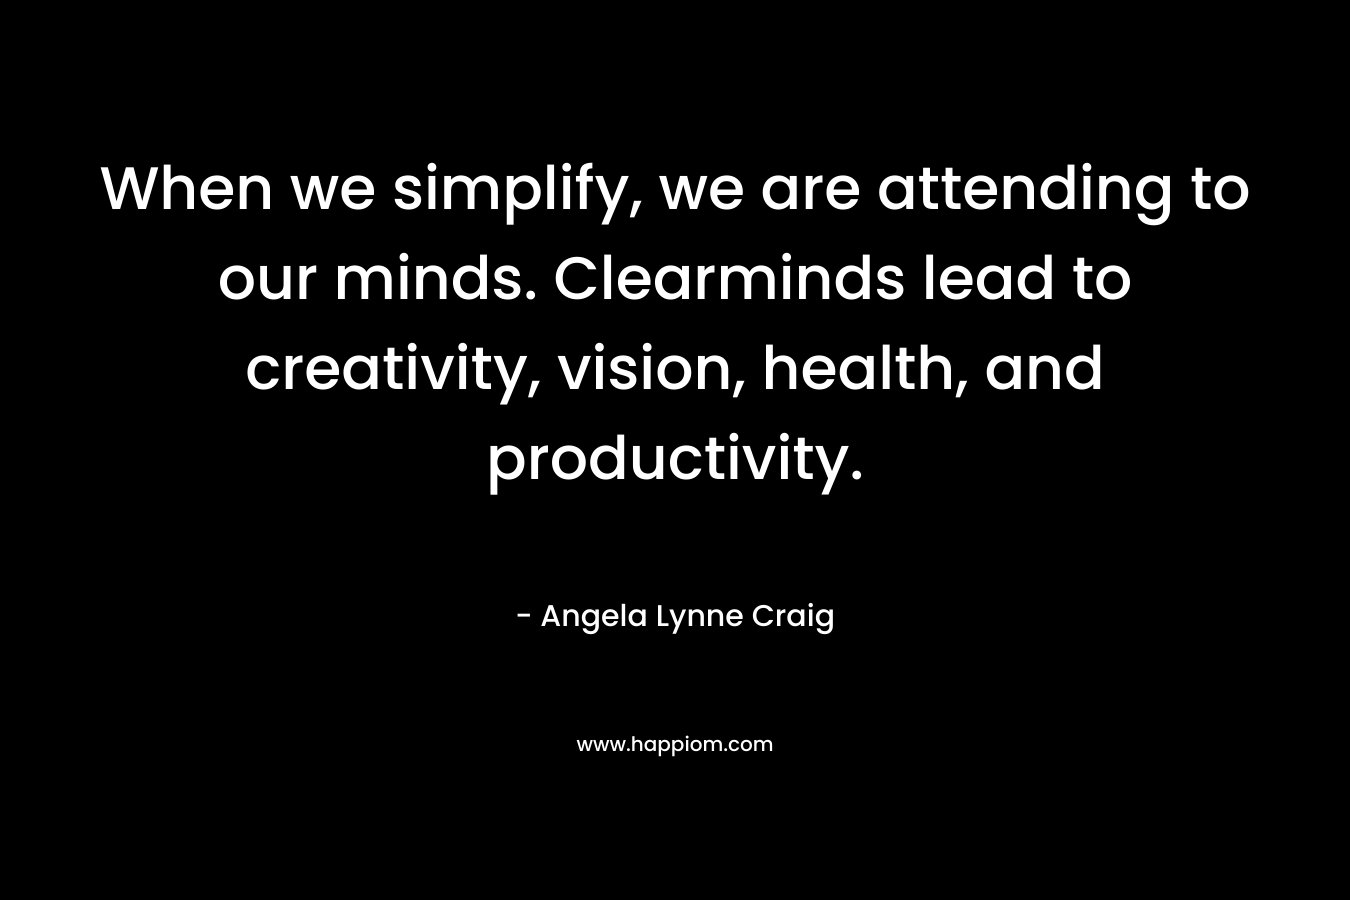 When we simplify, we are attending to our minds. Clearminds lead to creativity, vision, health, and productivity.